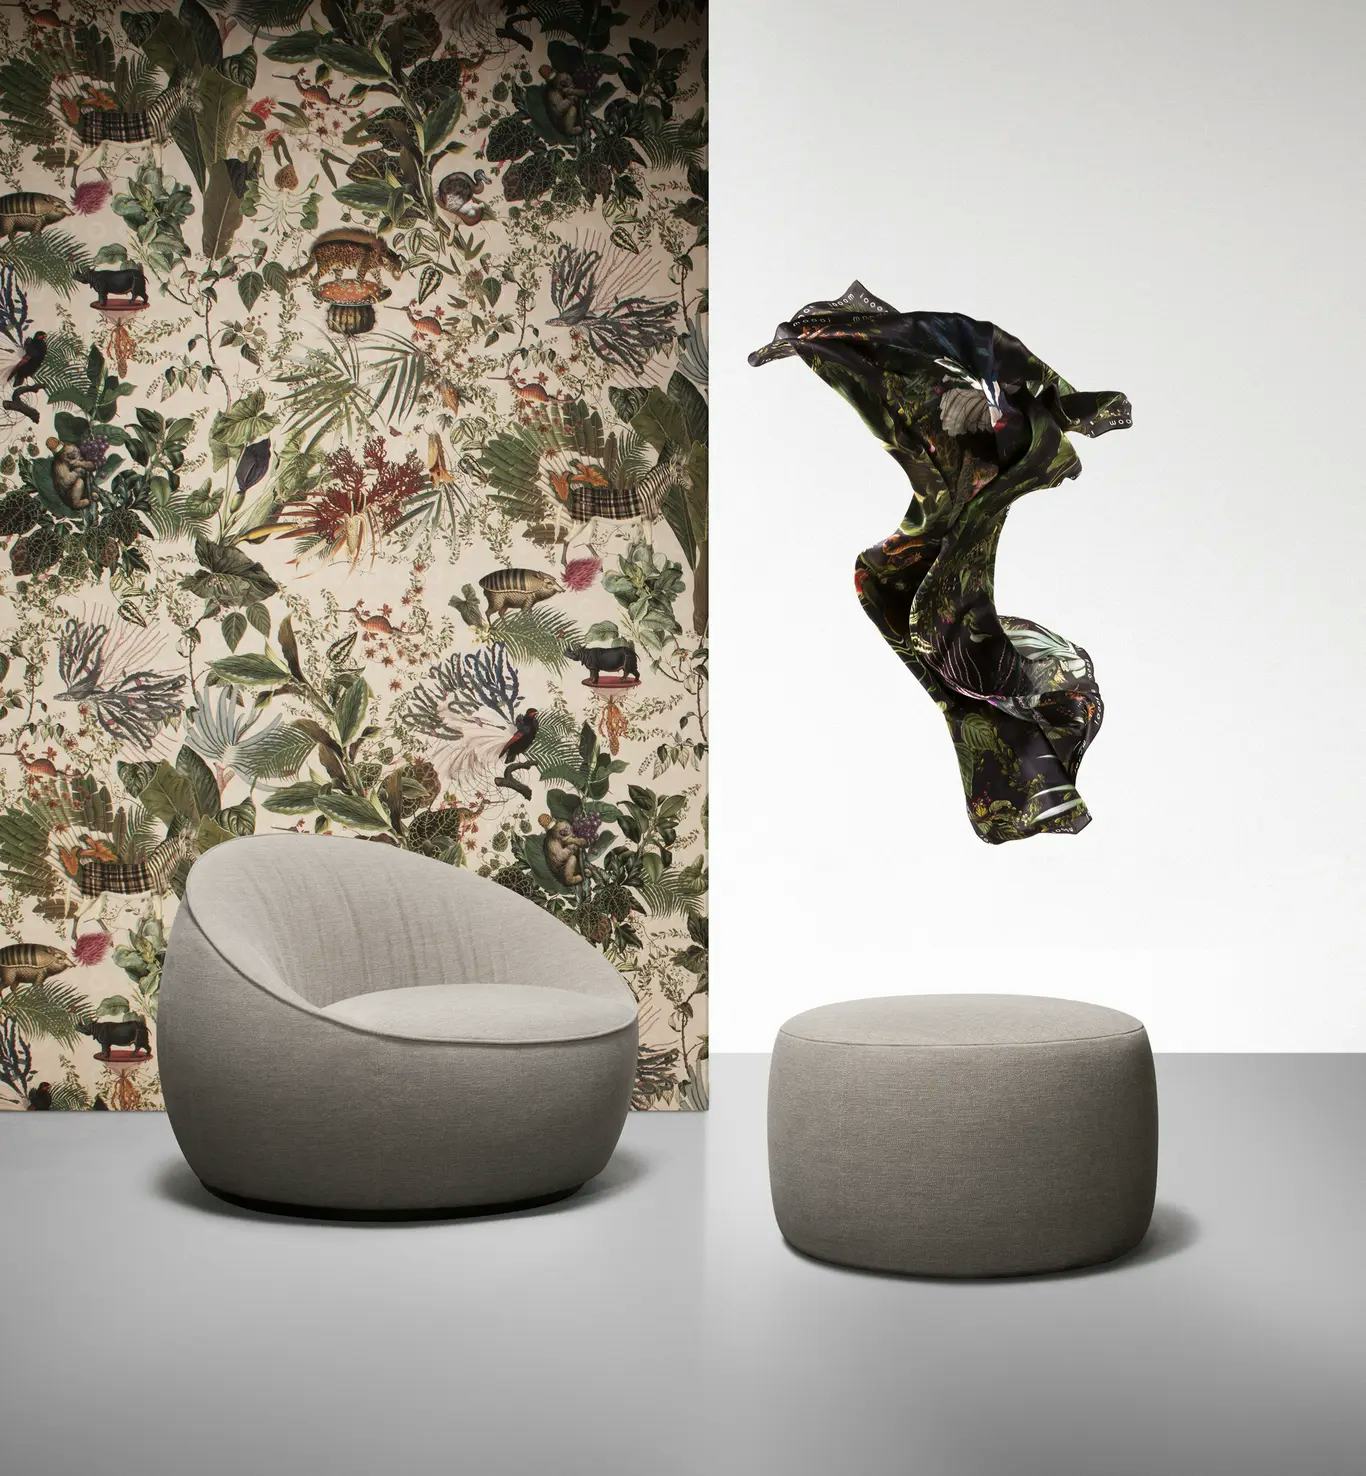 Poetic composition of Hana Armchair, Pooof and Scarf Mengarerie